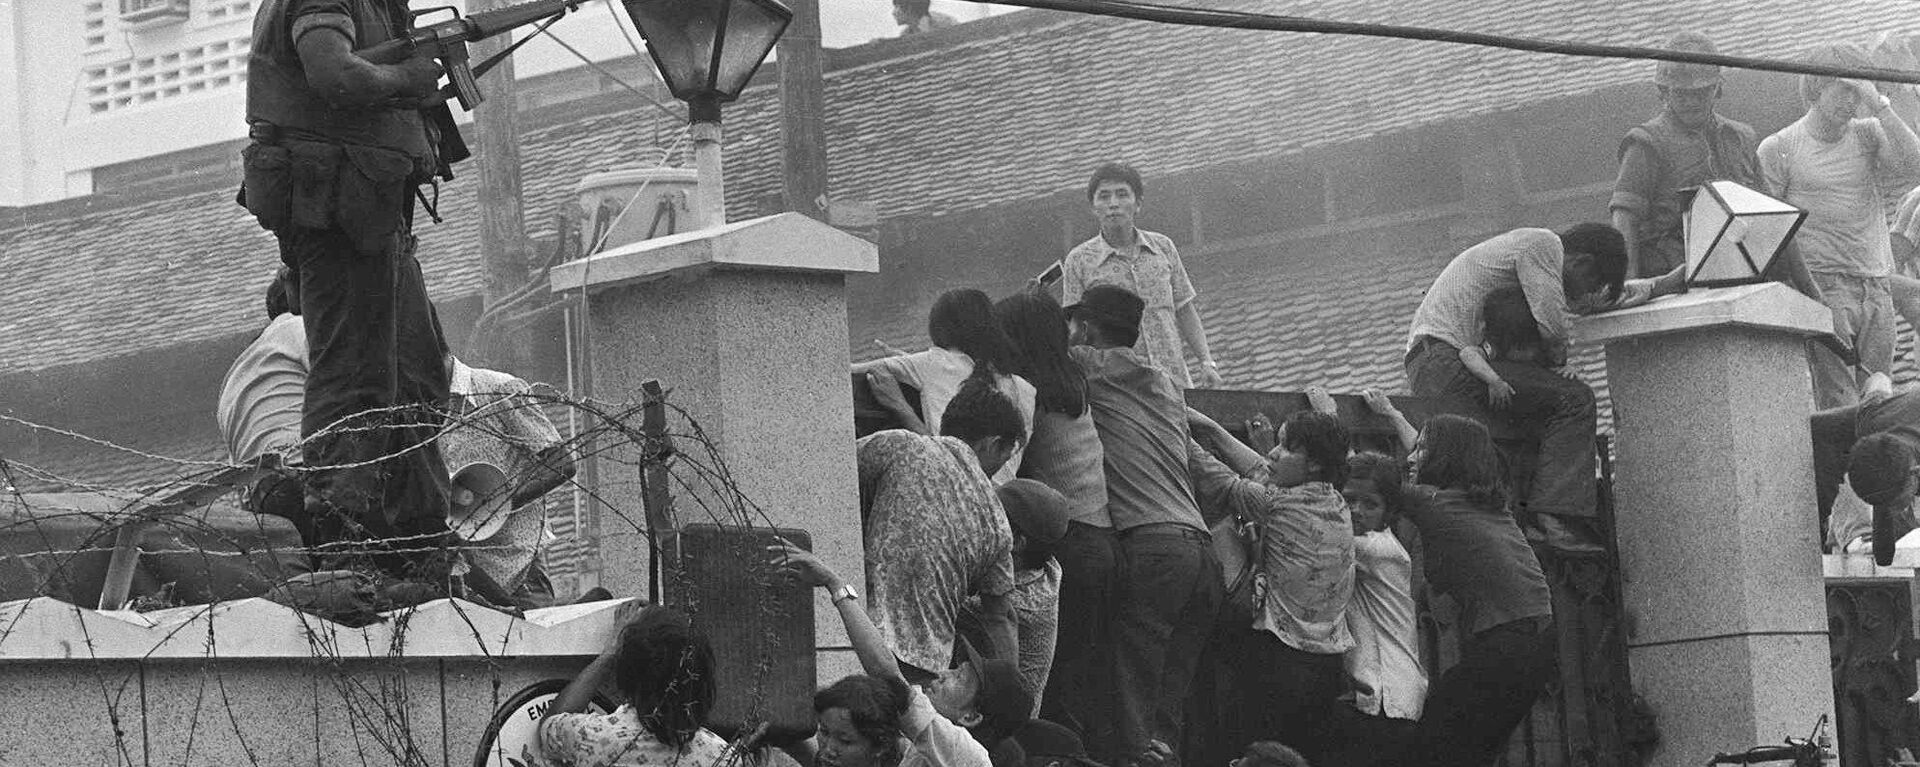 People clamber into the US embassy compound during the fall of Saigon in 1975 - Sputnik Việt Nam, 1920, 21.08.2021